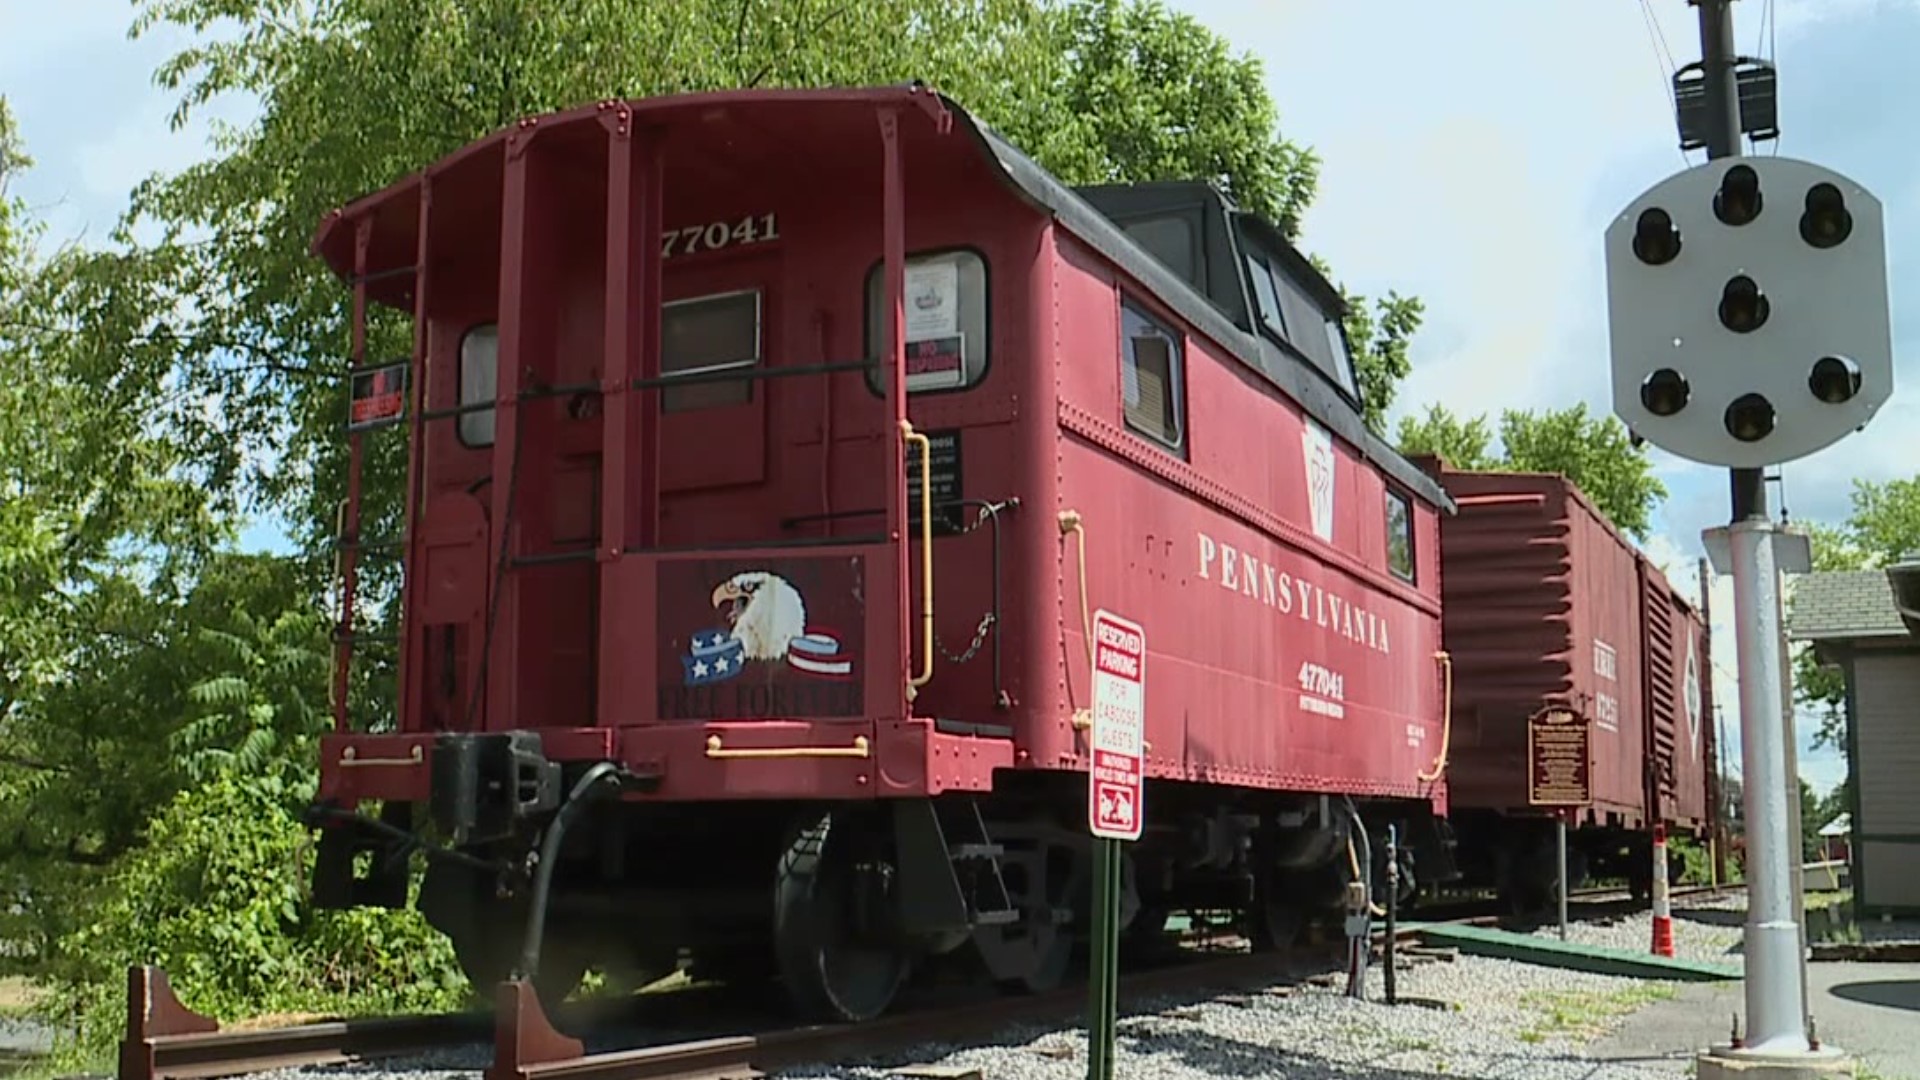 Reservations for this caboose are going fast this summer.